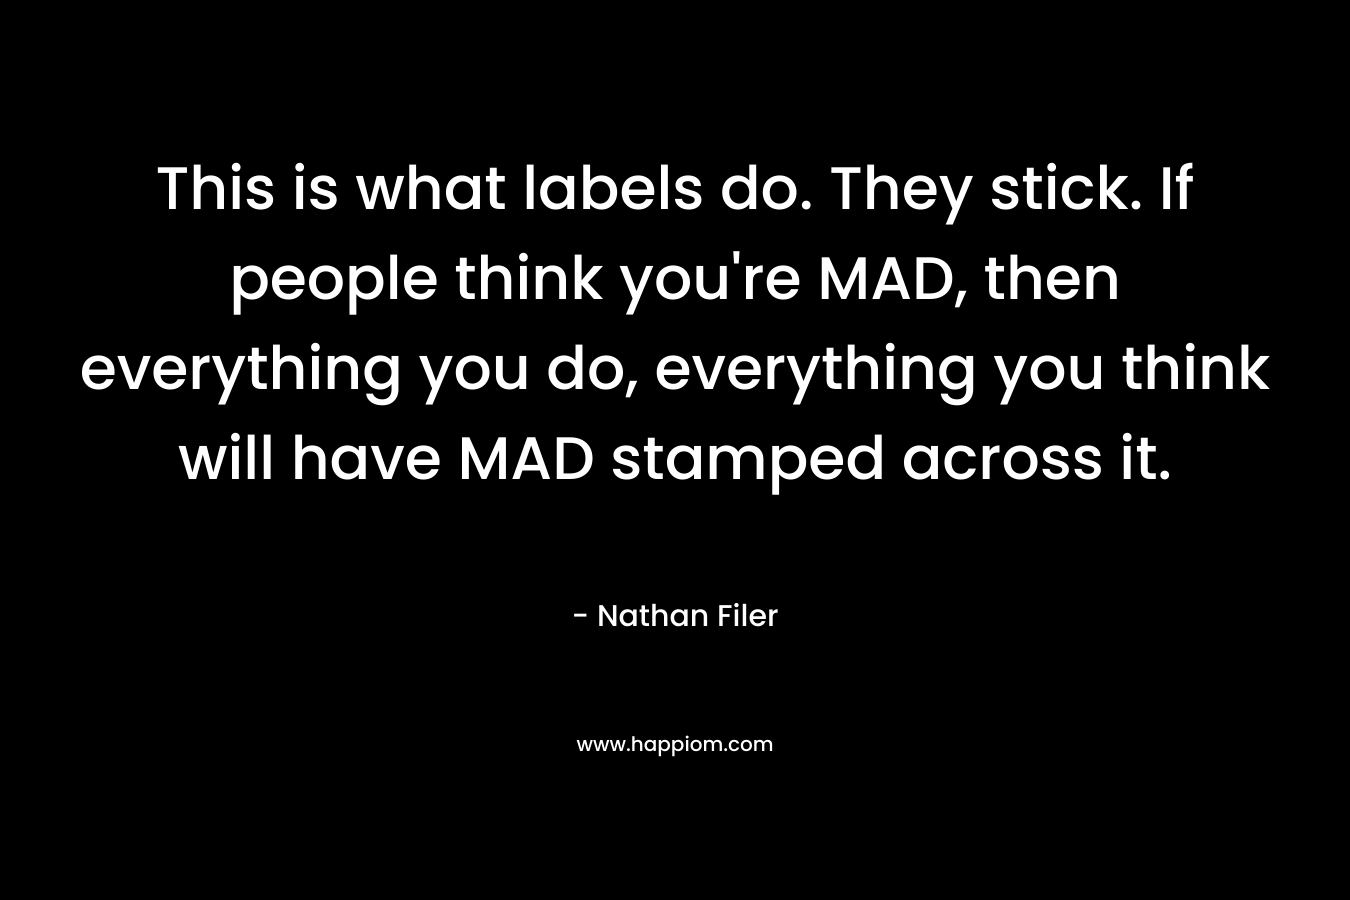 This is what labels do. They stick. If people think you're MAD, then everything you do, everything you think will have MAD stamped across it.